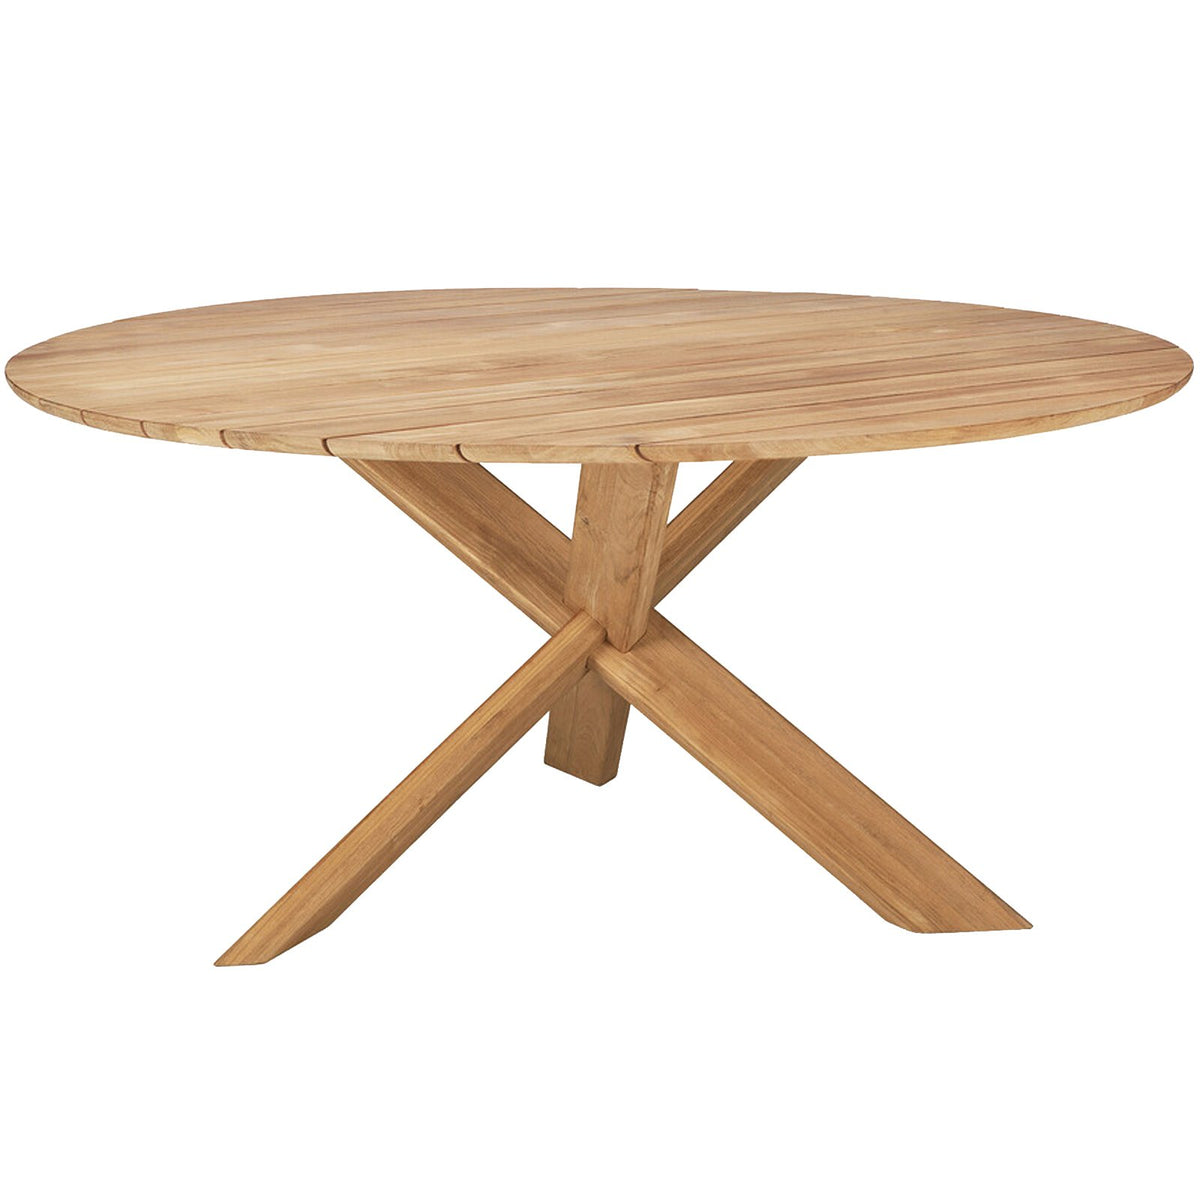 Round Teak Outdoor Dining Table